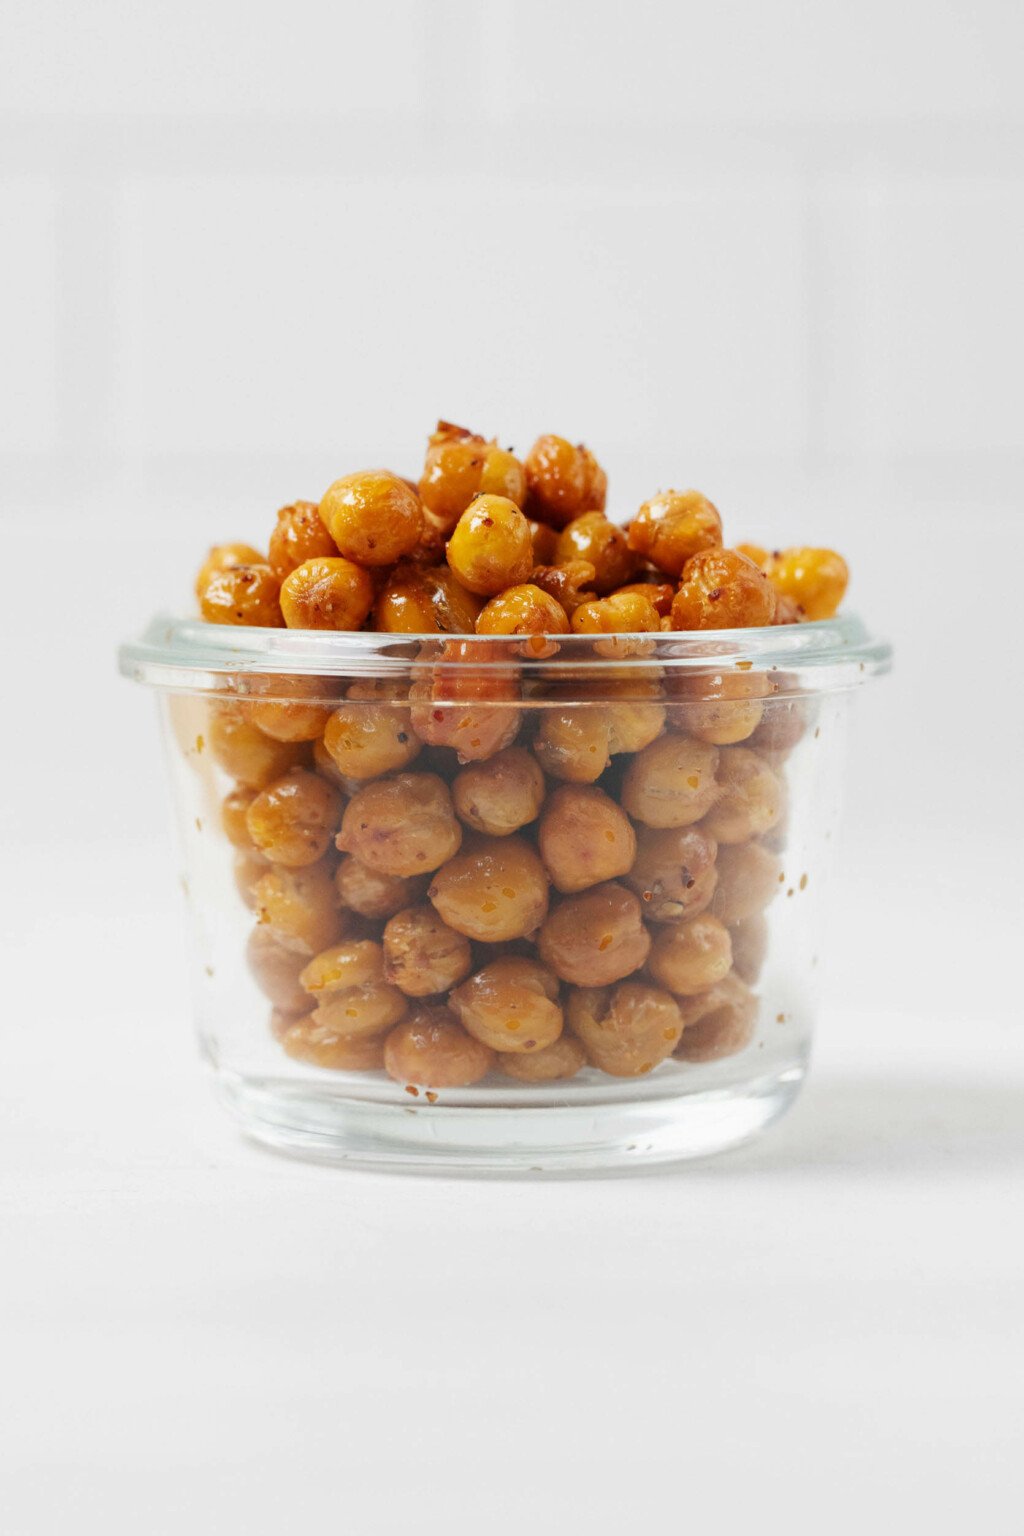 A glass, Weck mason jar is filled with golden, crispy roasted chickpeas. A white tiled surface is visible behind the jar.